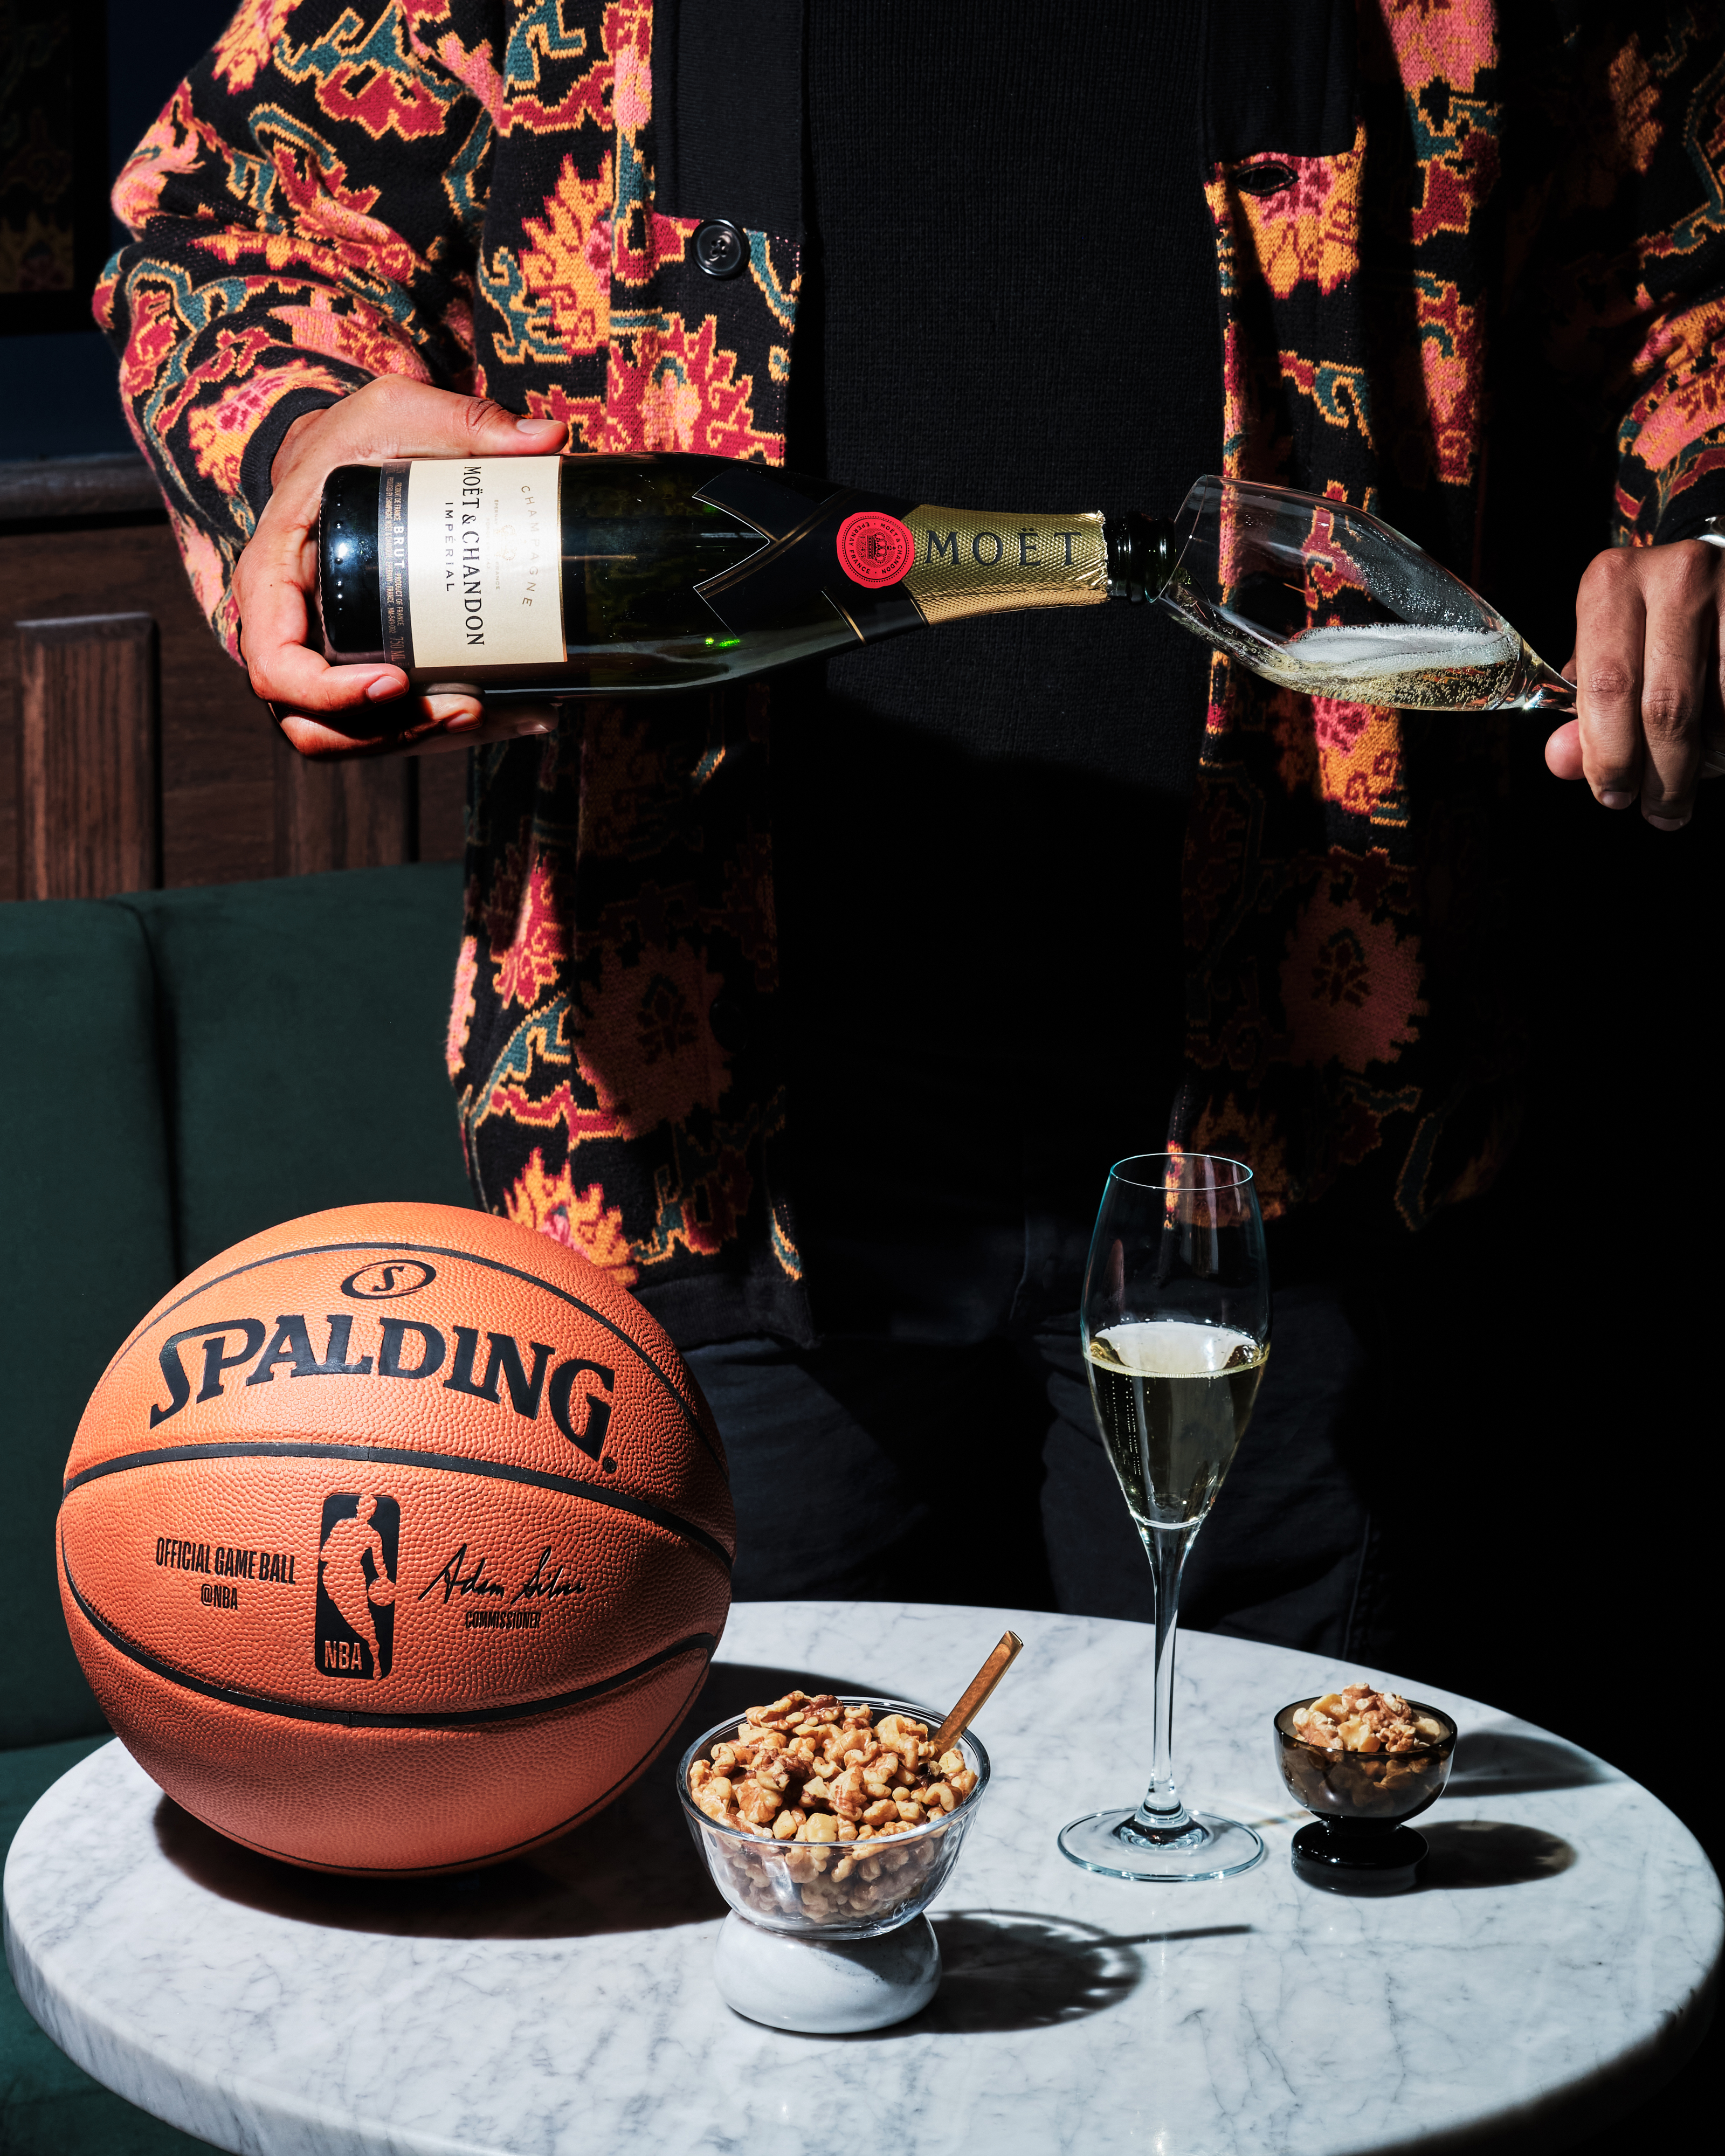 Moët & Chandon, the Official Champagne of the NBA